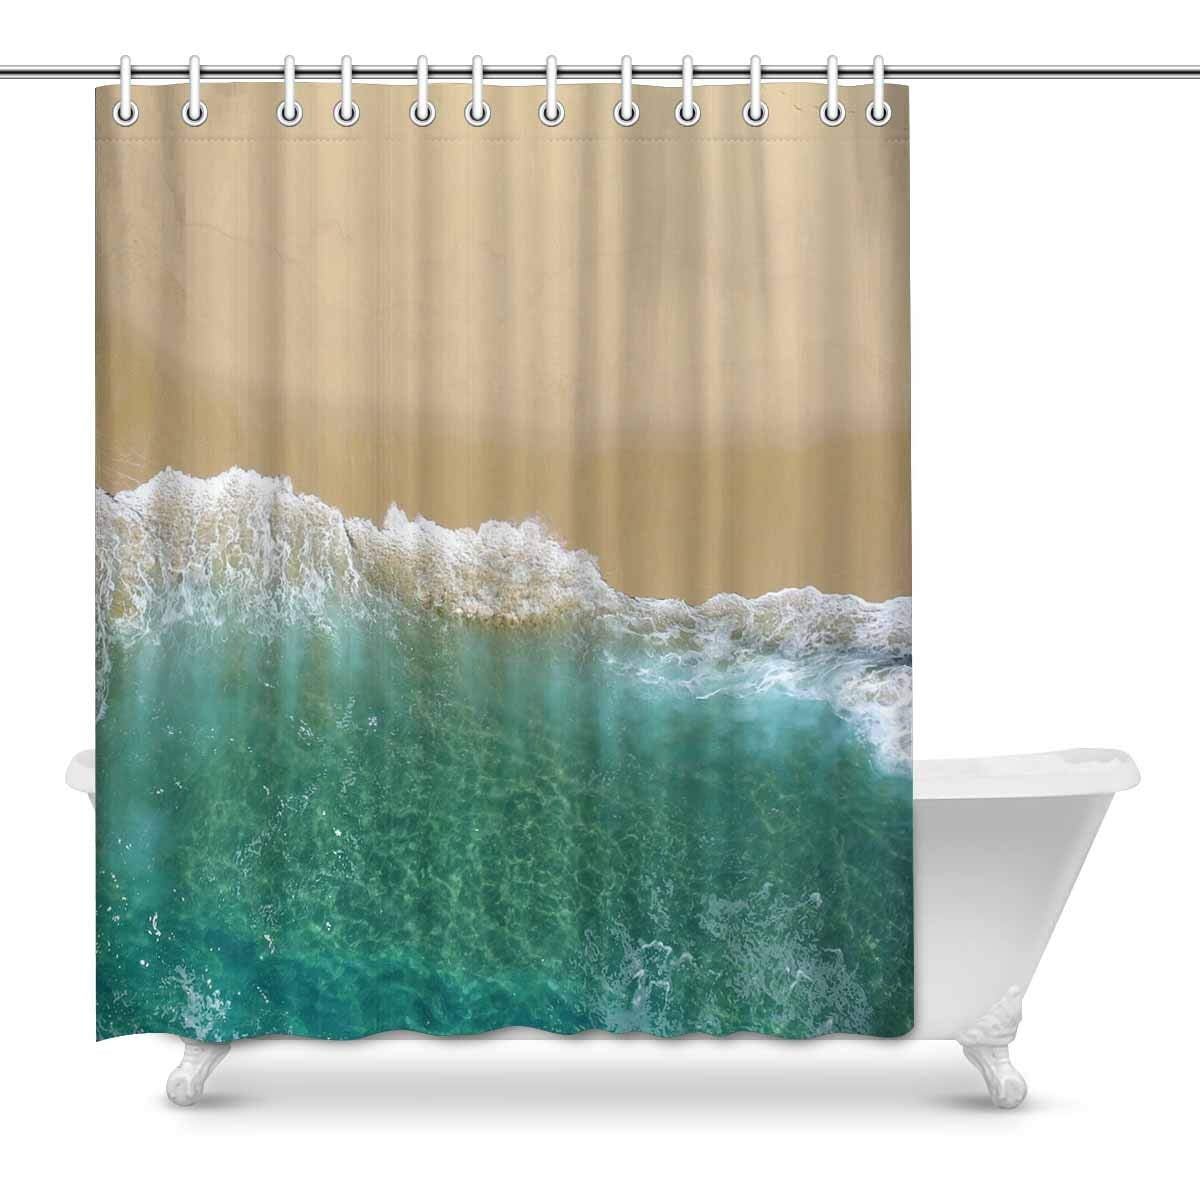 Details about   Sea Blue Sand Waterproof Bathroom Polyester Shower Curtain Liner Water Resistant 